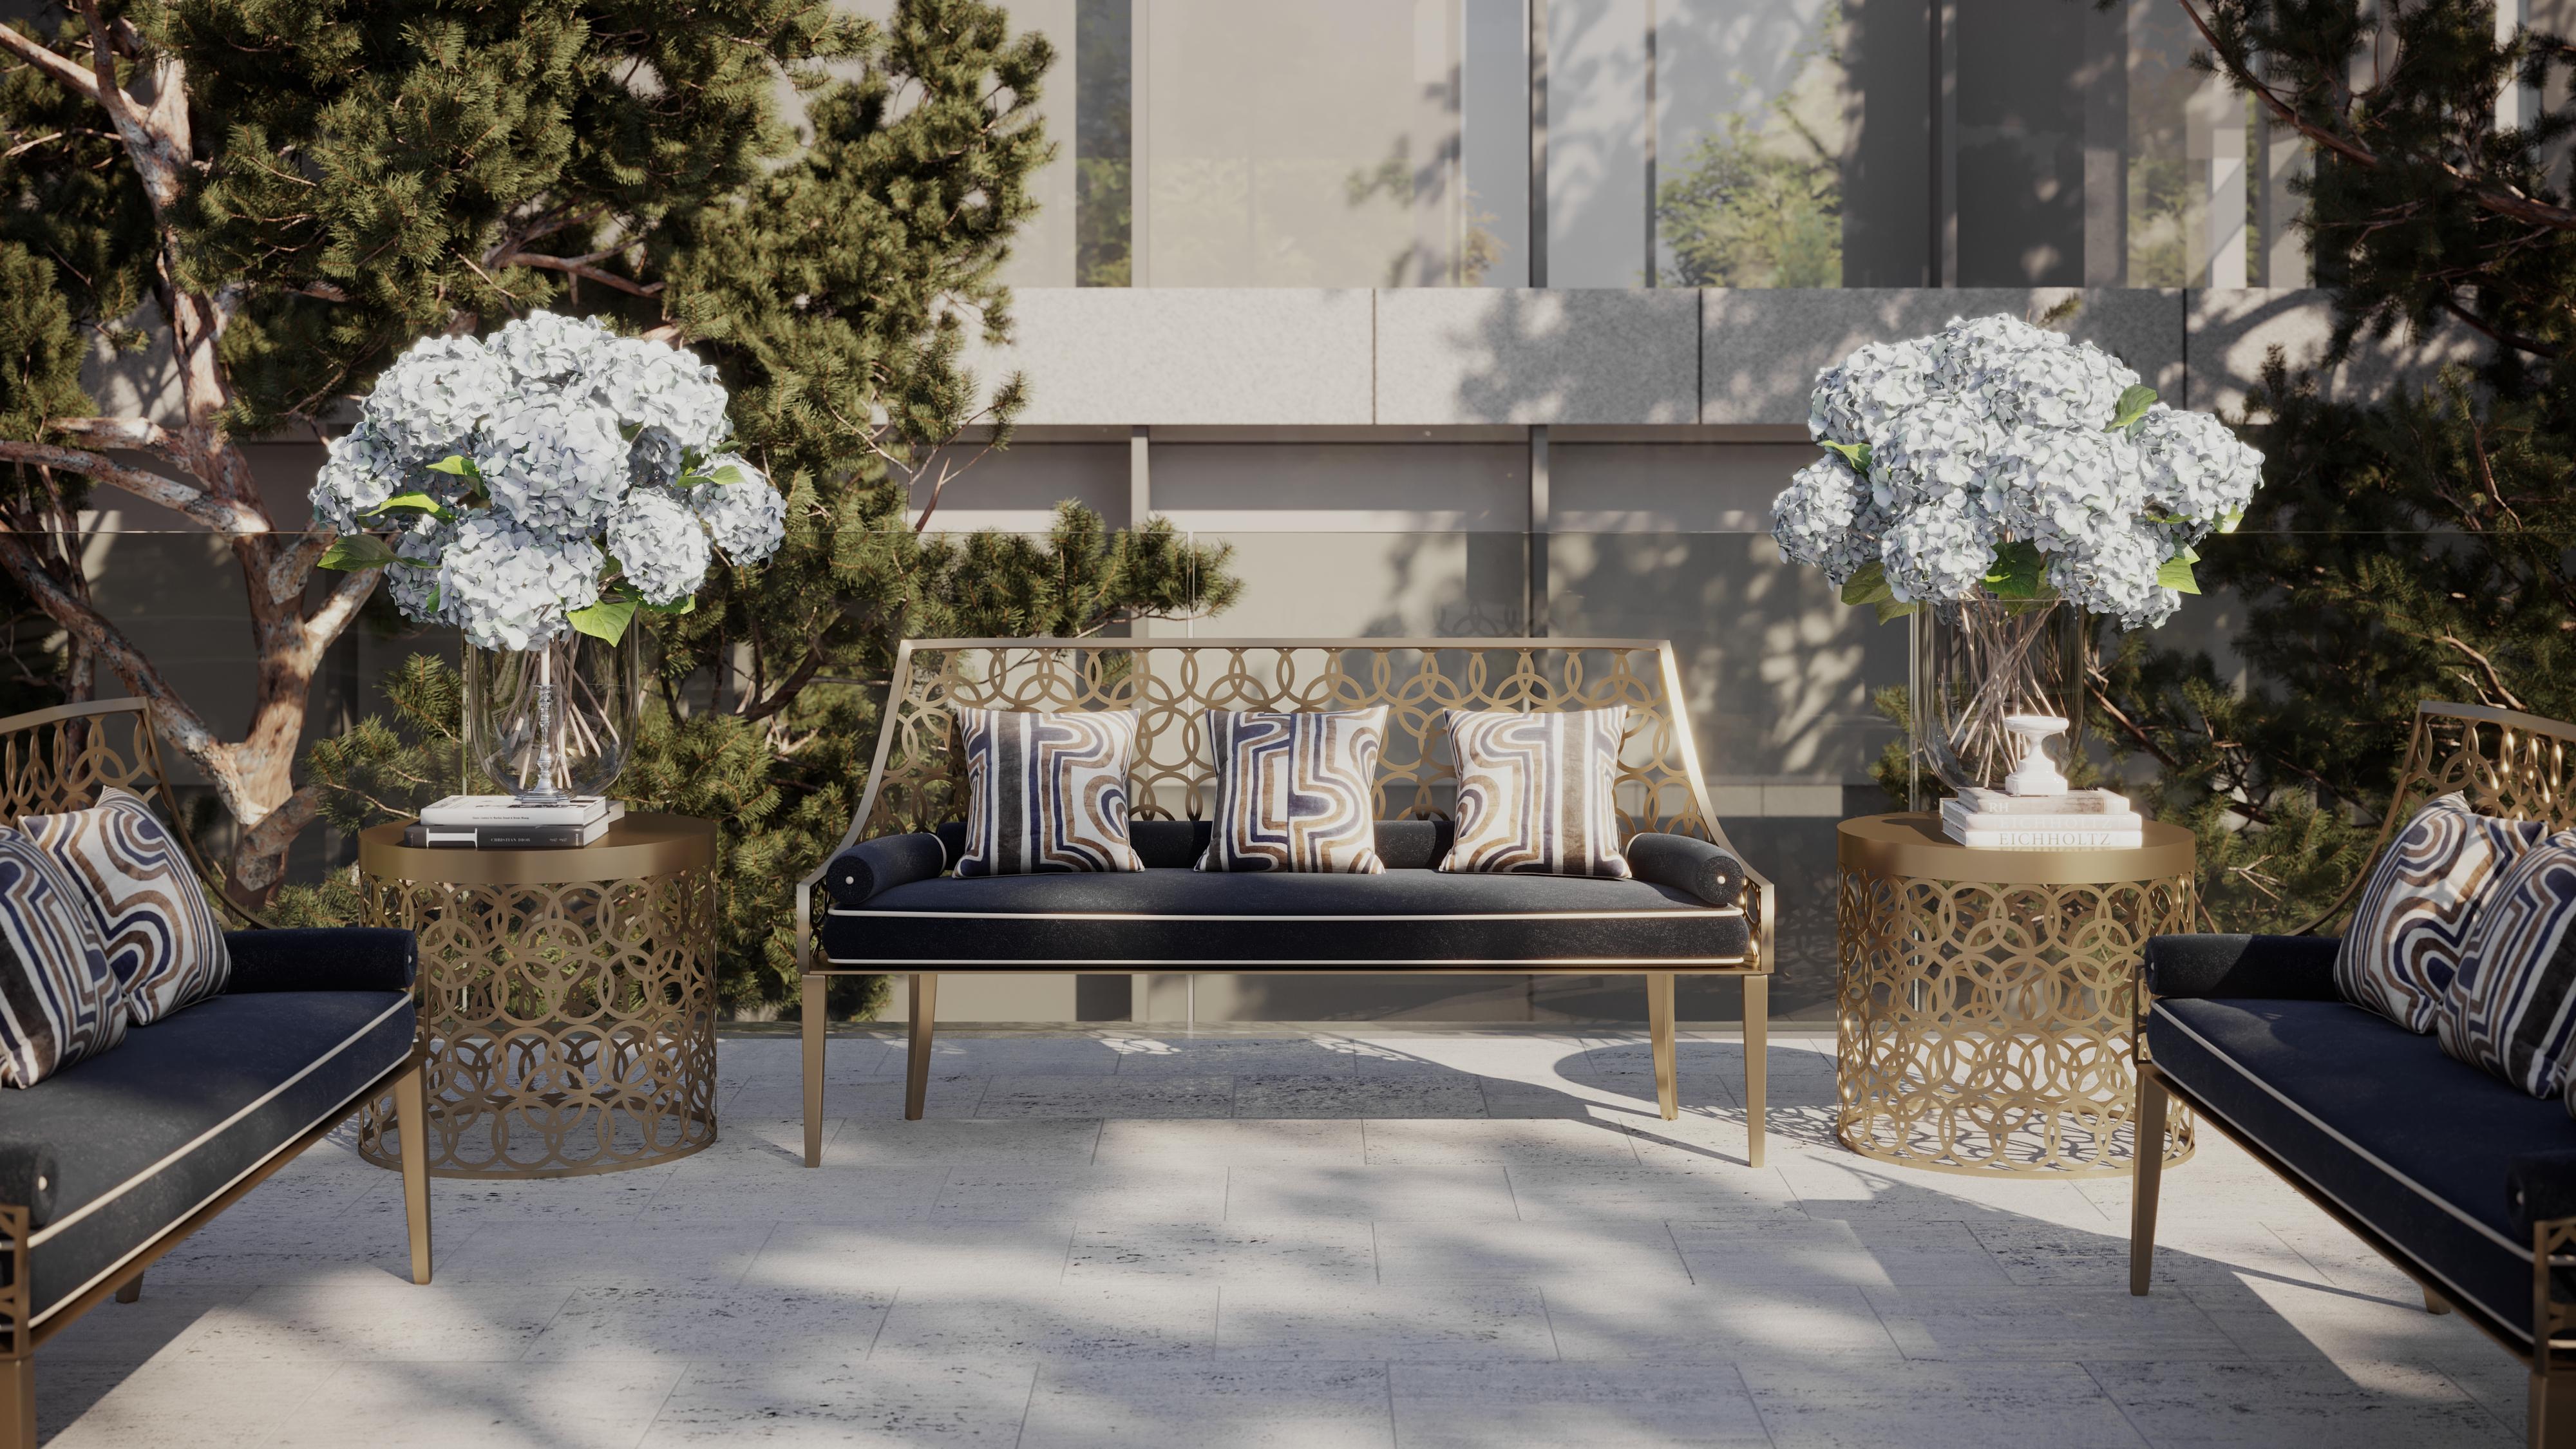 The Designer Wicker Outdoor Garden armchair, this beautiful chair epitomises modern outdoor furniture and embraces the latest down-to-earth trends. Truly reflecting refined contemporary elegance. Offering accomplished outdoor furniture with